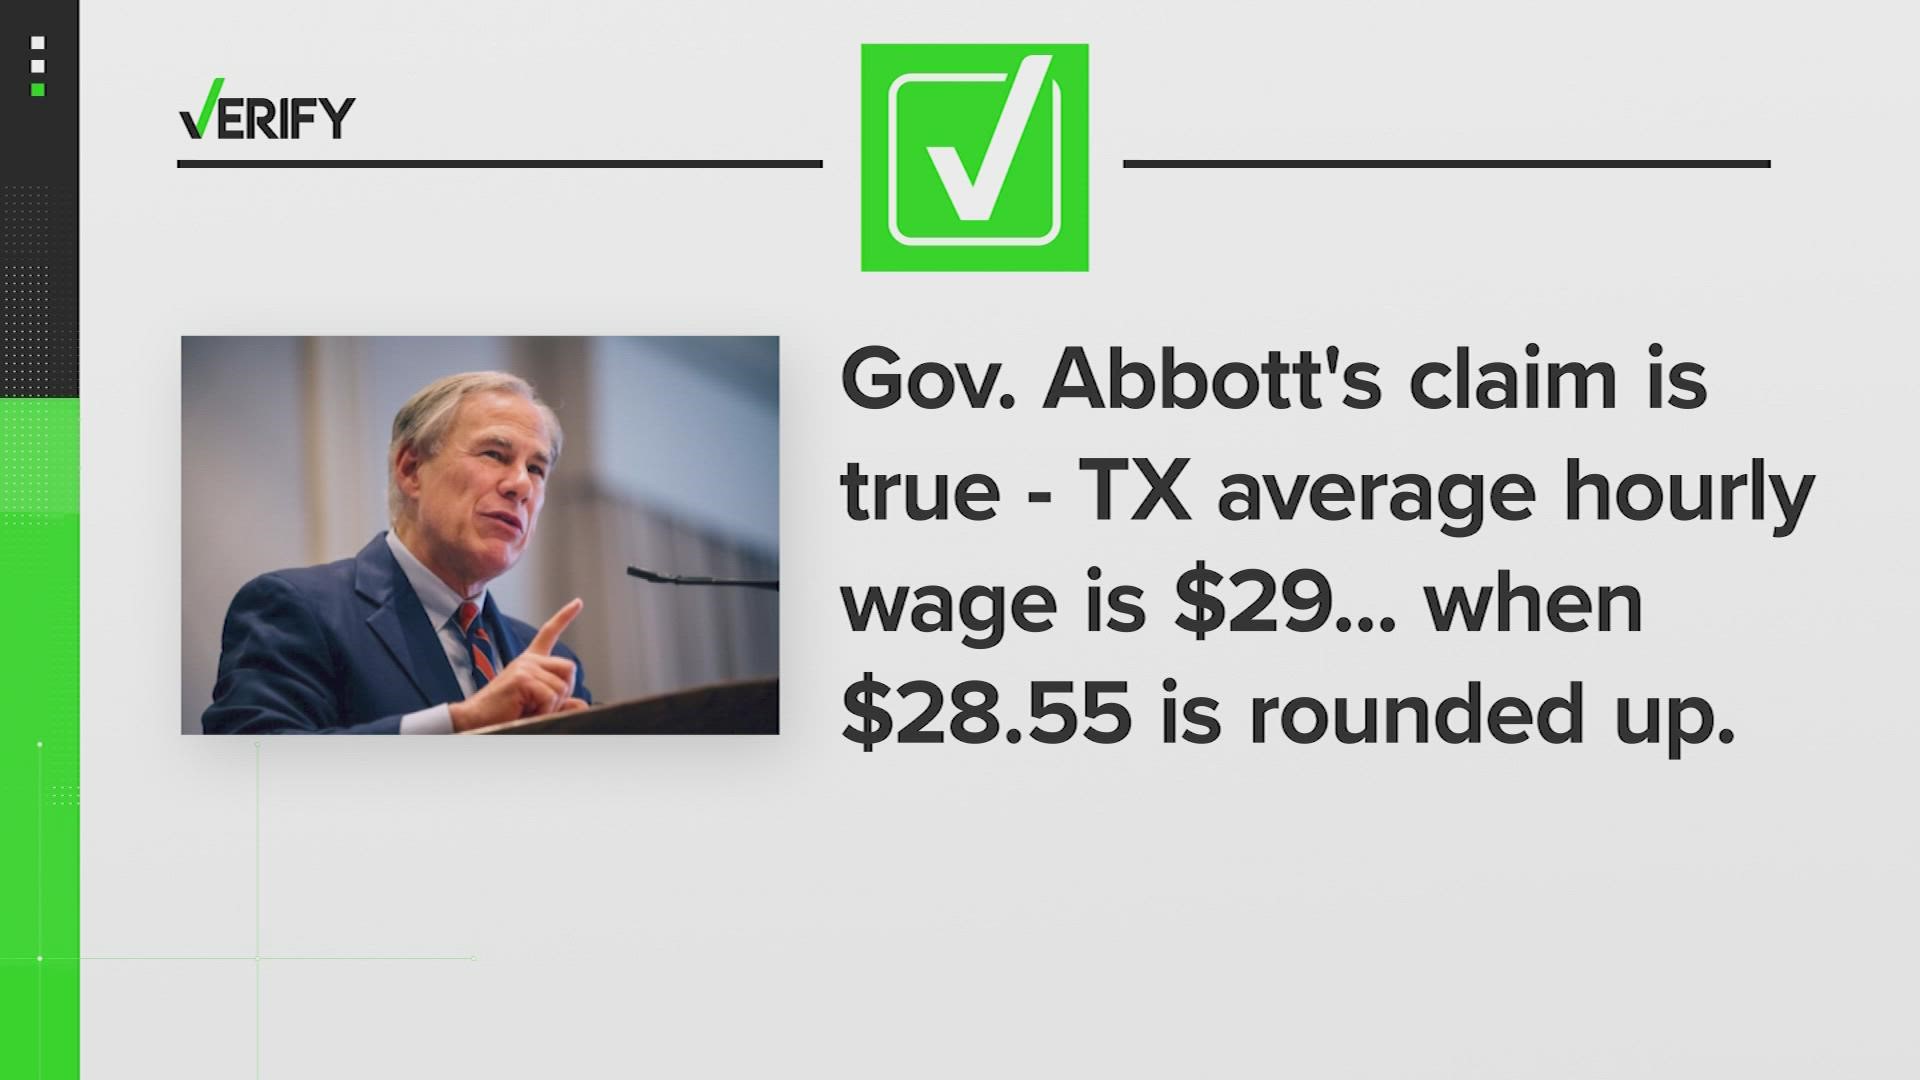 During Gov. Abbott's visit to Houston, he made claims about the average hourly wage in Texas being $29. Our VERIFY team found this claim to be true.